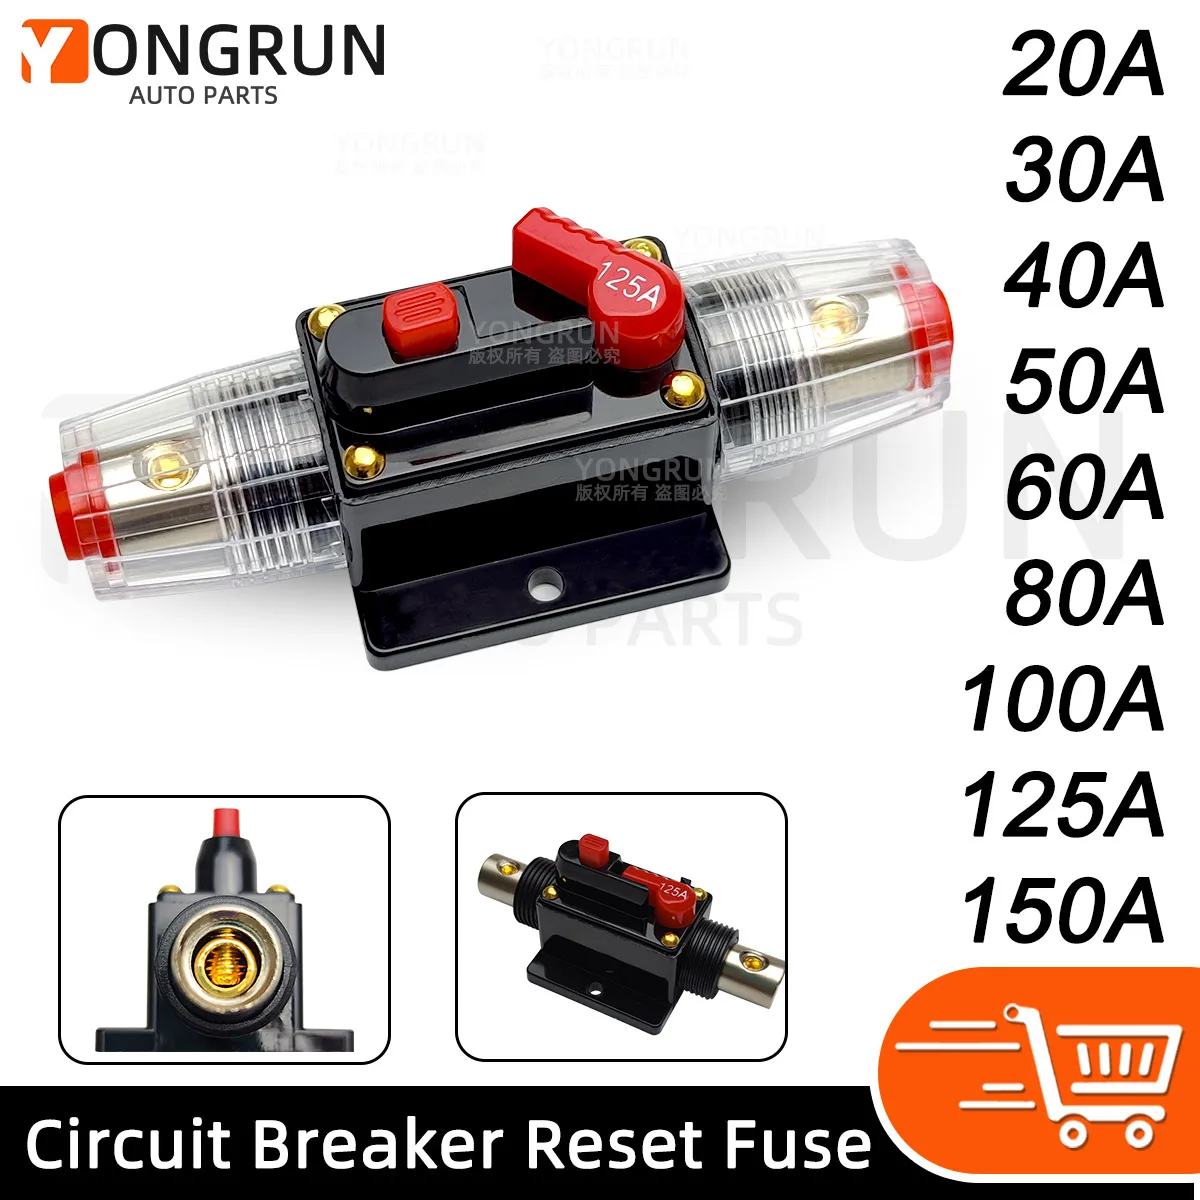 20A to 150A Circuit Breaker with Manual Reset for Car Audio System Waterproof Marine Circuit Breaker Reset Fuse 12V48V DC